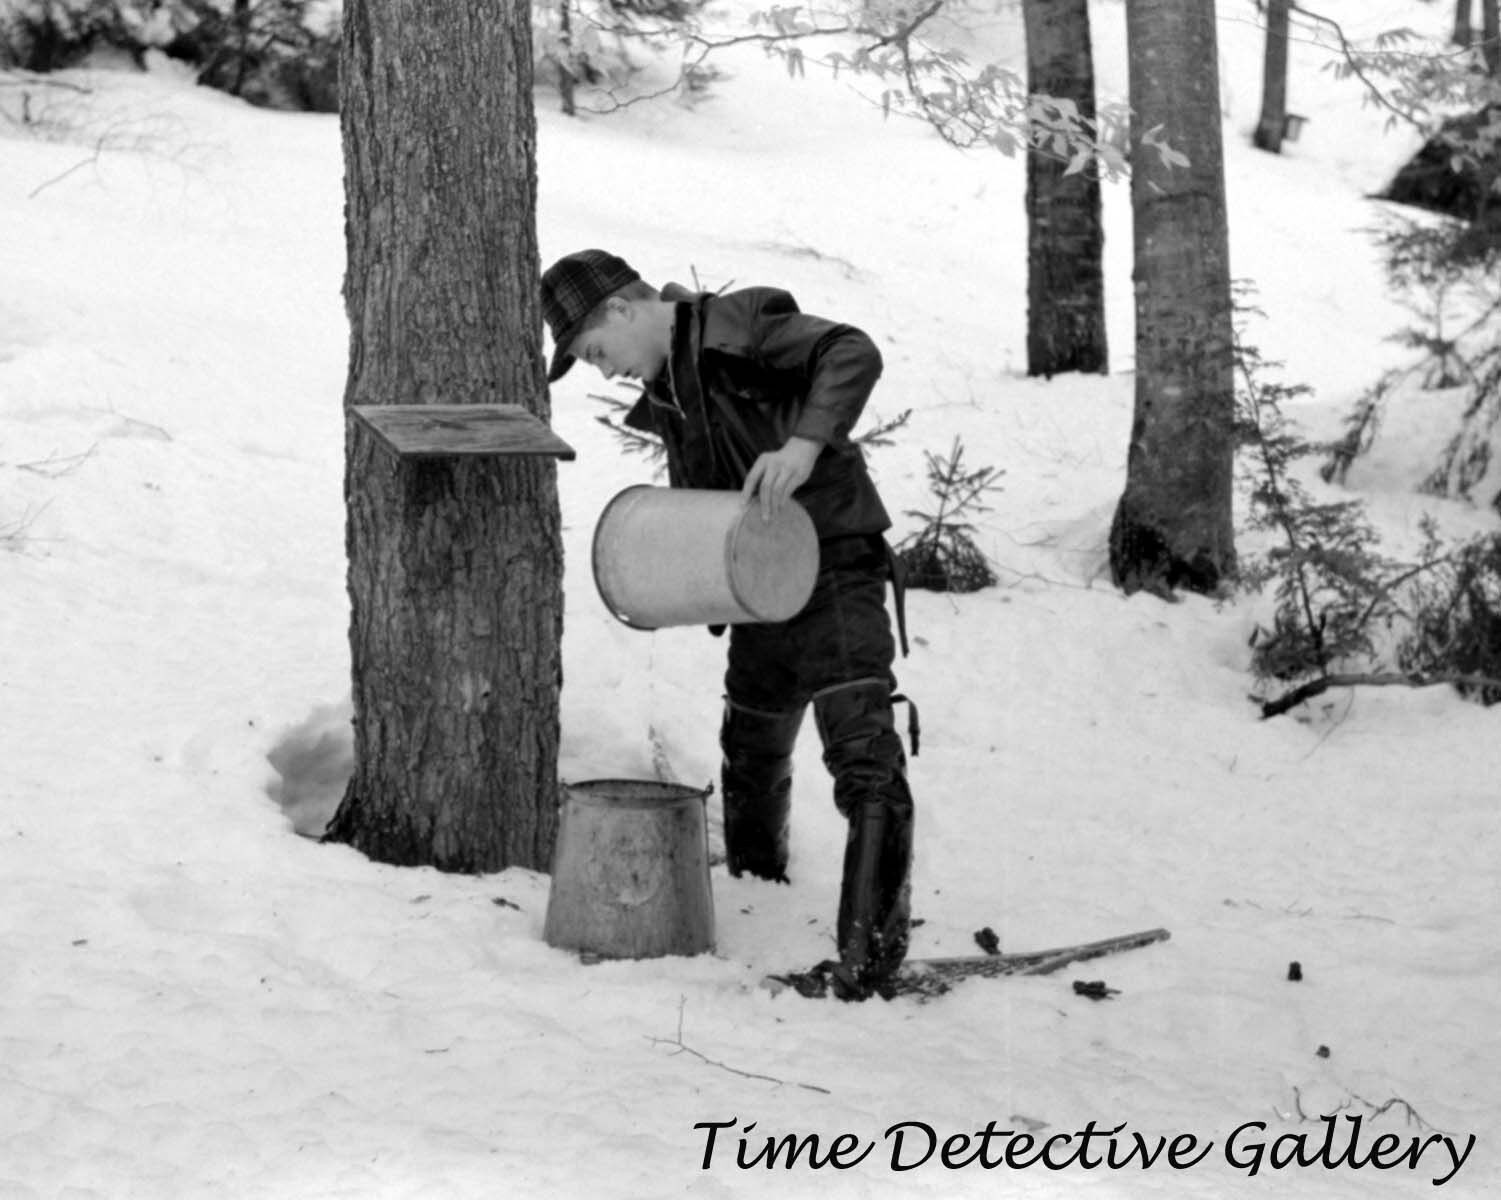 Pouring Sap from Maple Tree for Syrup, Waitsfield VT -1940- Vintage Photo Print